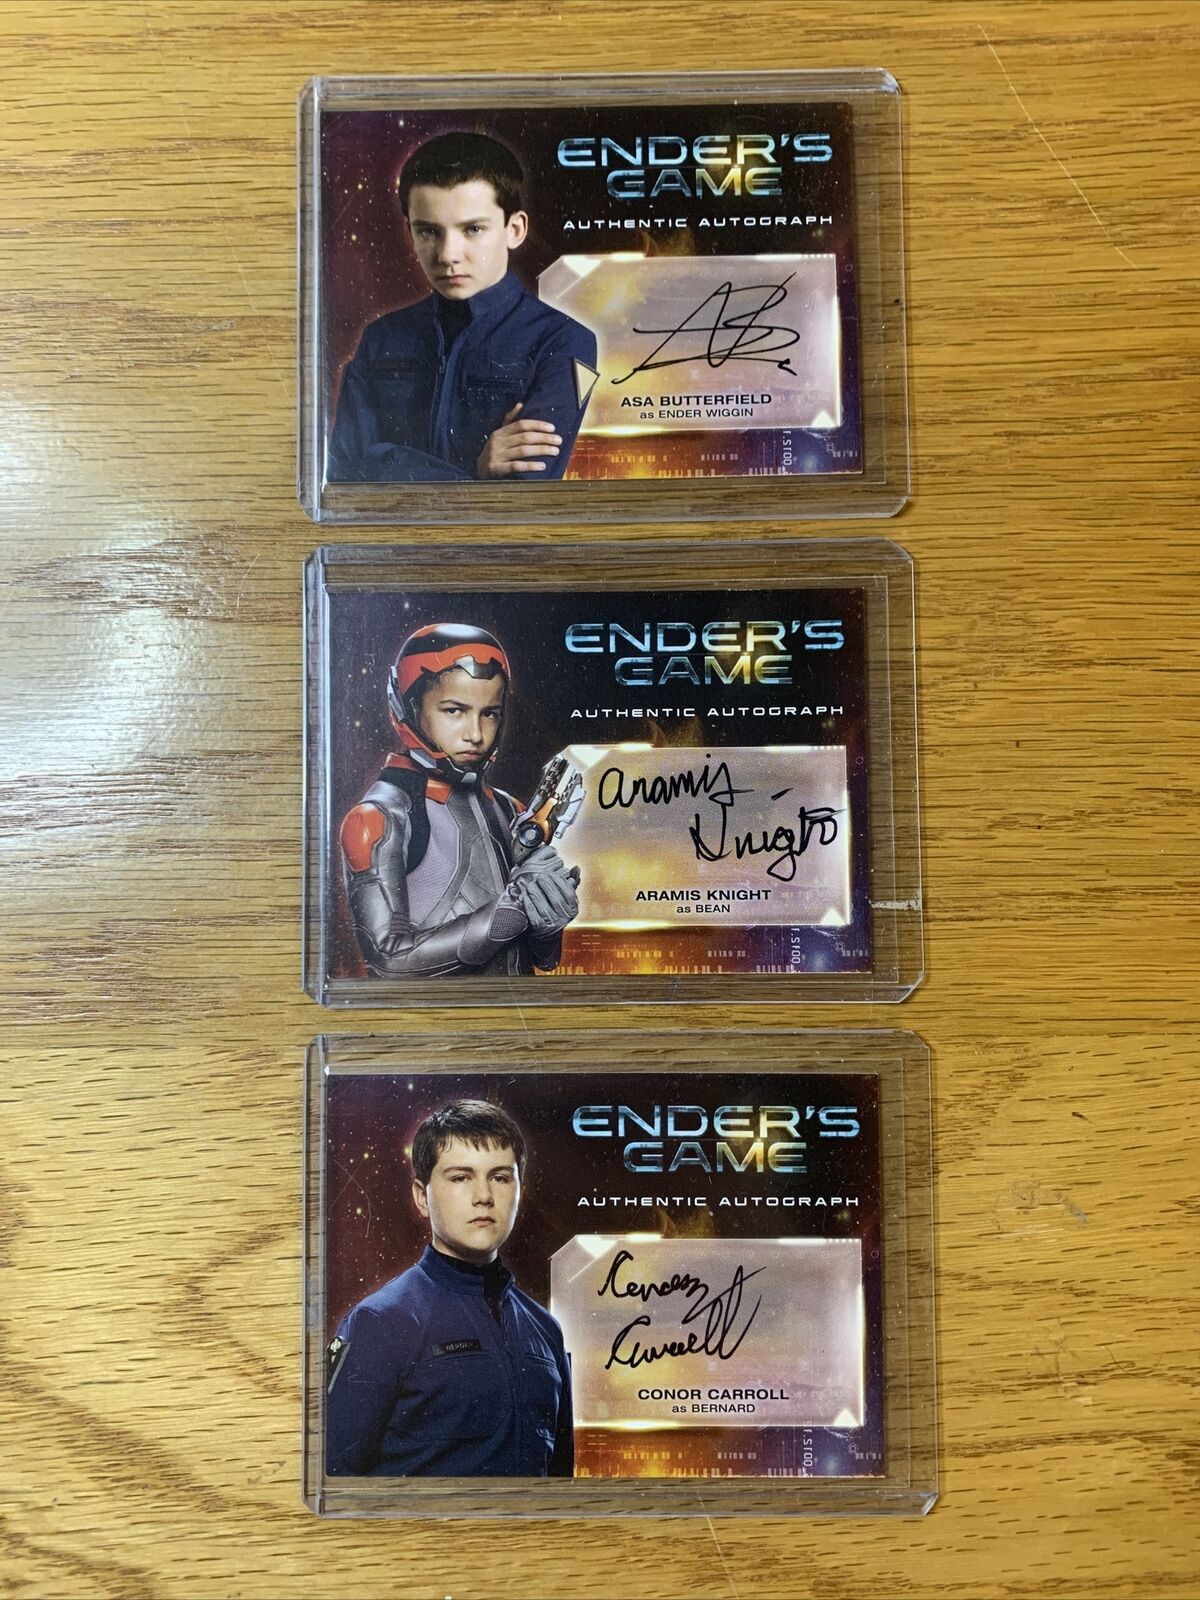 ENDER'S GAME Autograph Card Lot of 3: Features Asa Butterfield